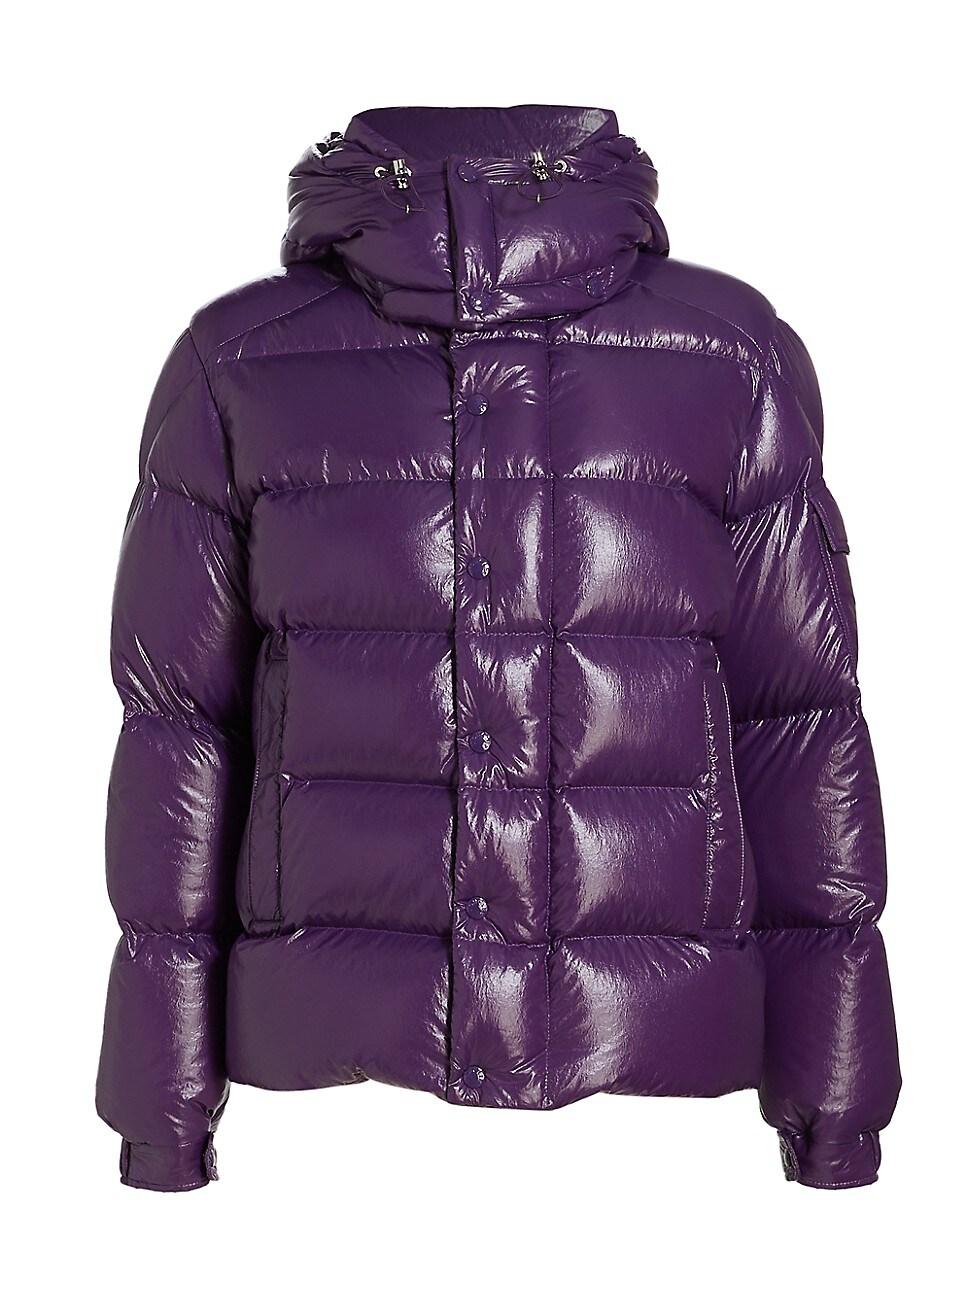 Moncler Synthetic Maya 70 Jacket in Woodland Violet (Purple) | Lyst